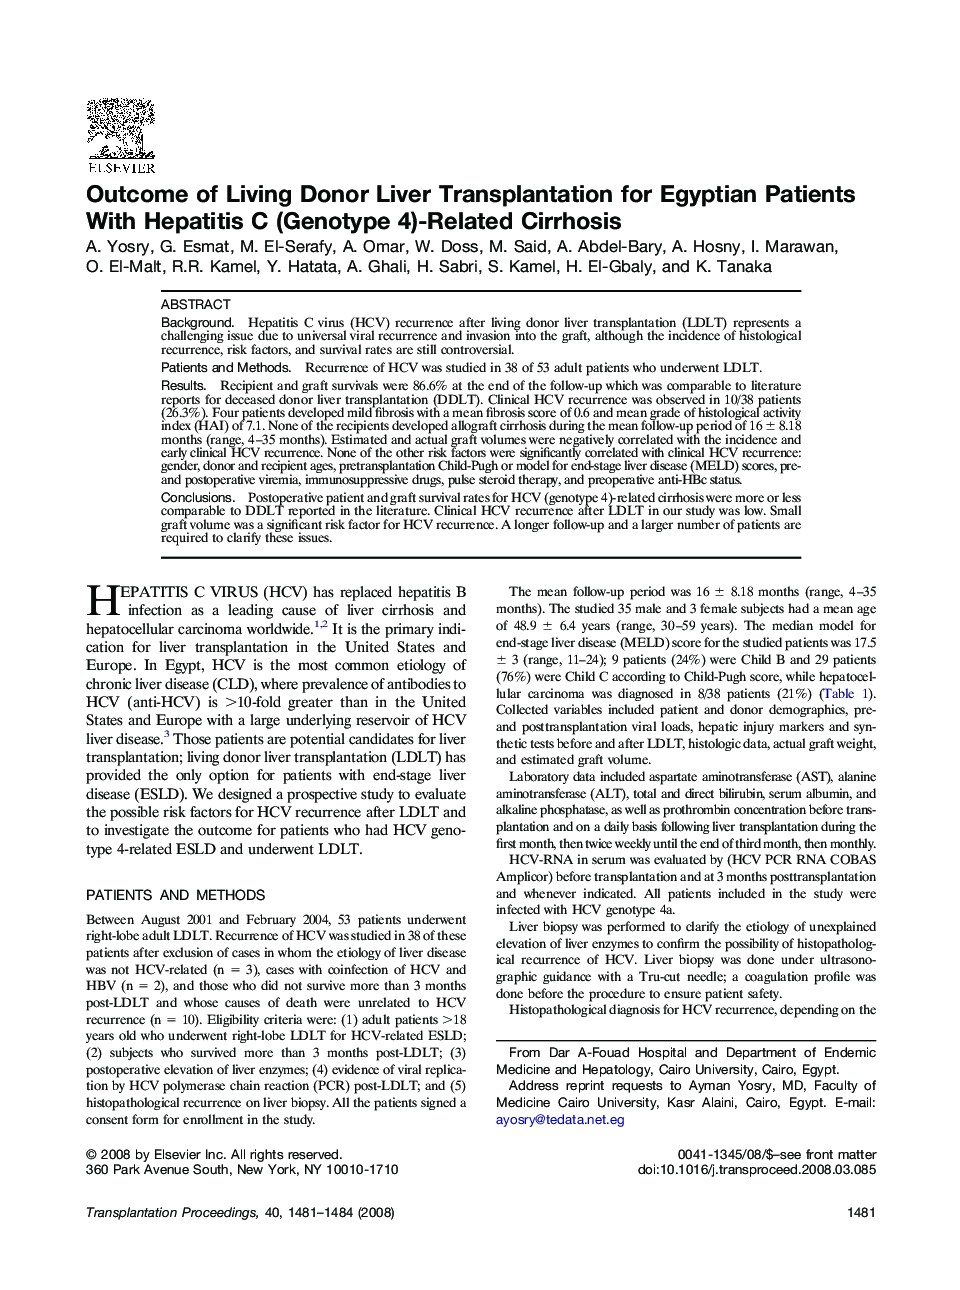 Outcome of Living Donor Liver Transplantation for Egyptian Patients With Hepatitis C (Genotype 4)-Related Cirrhosis